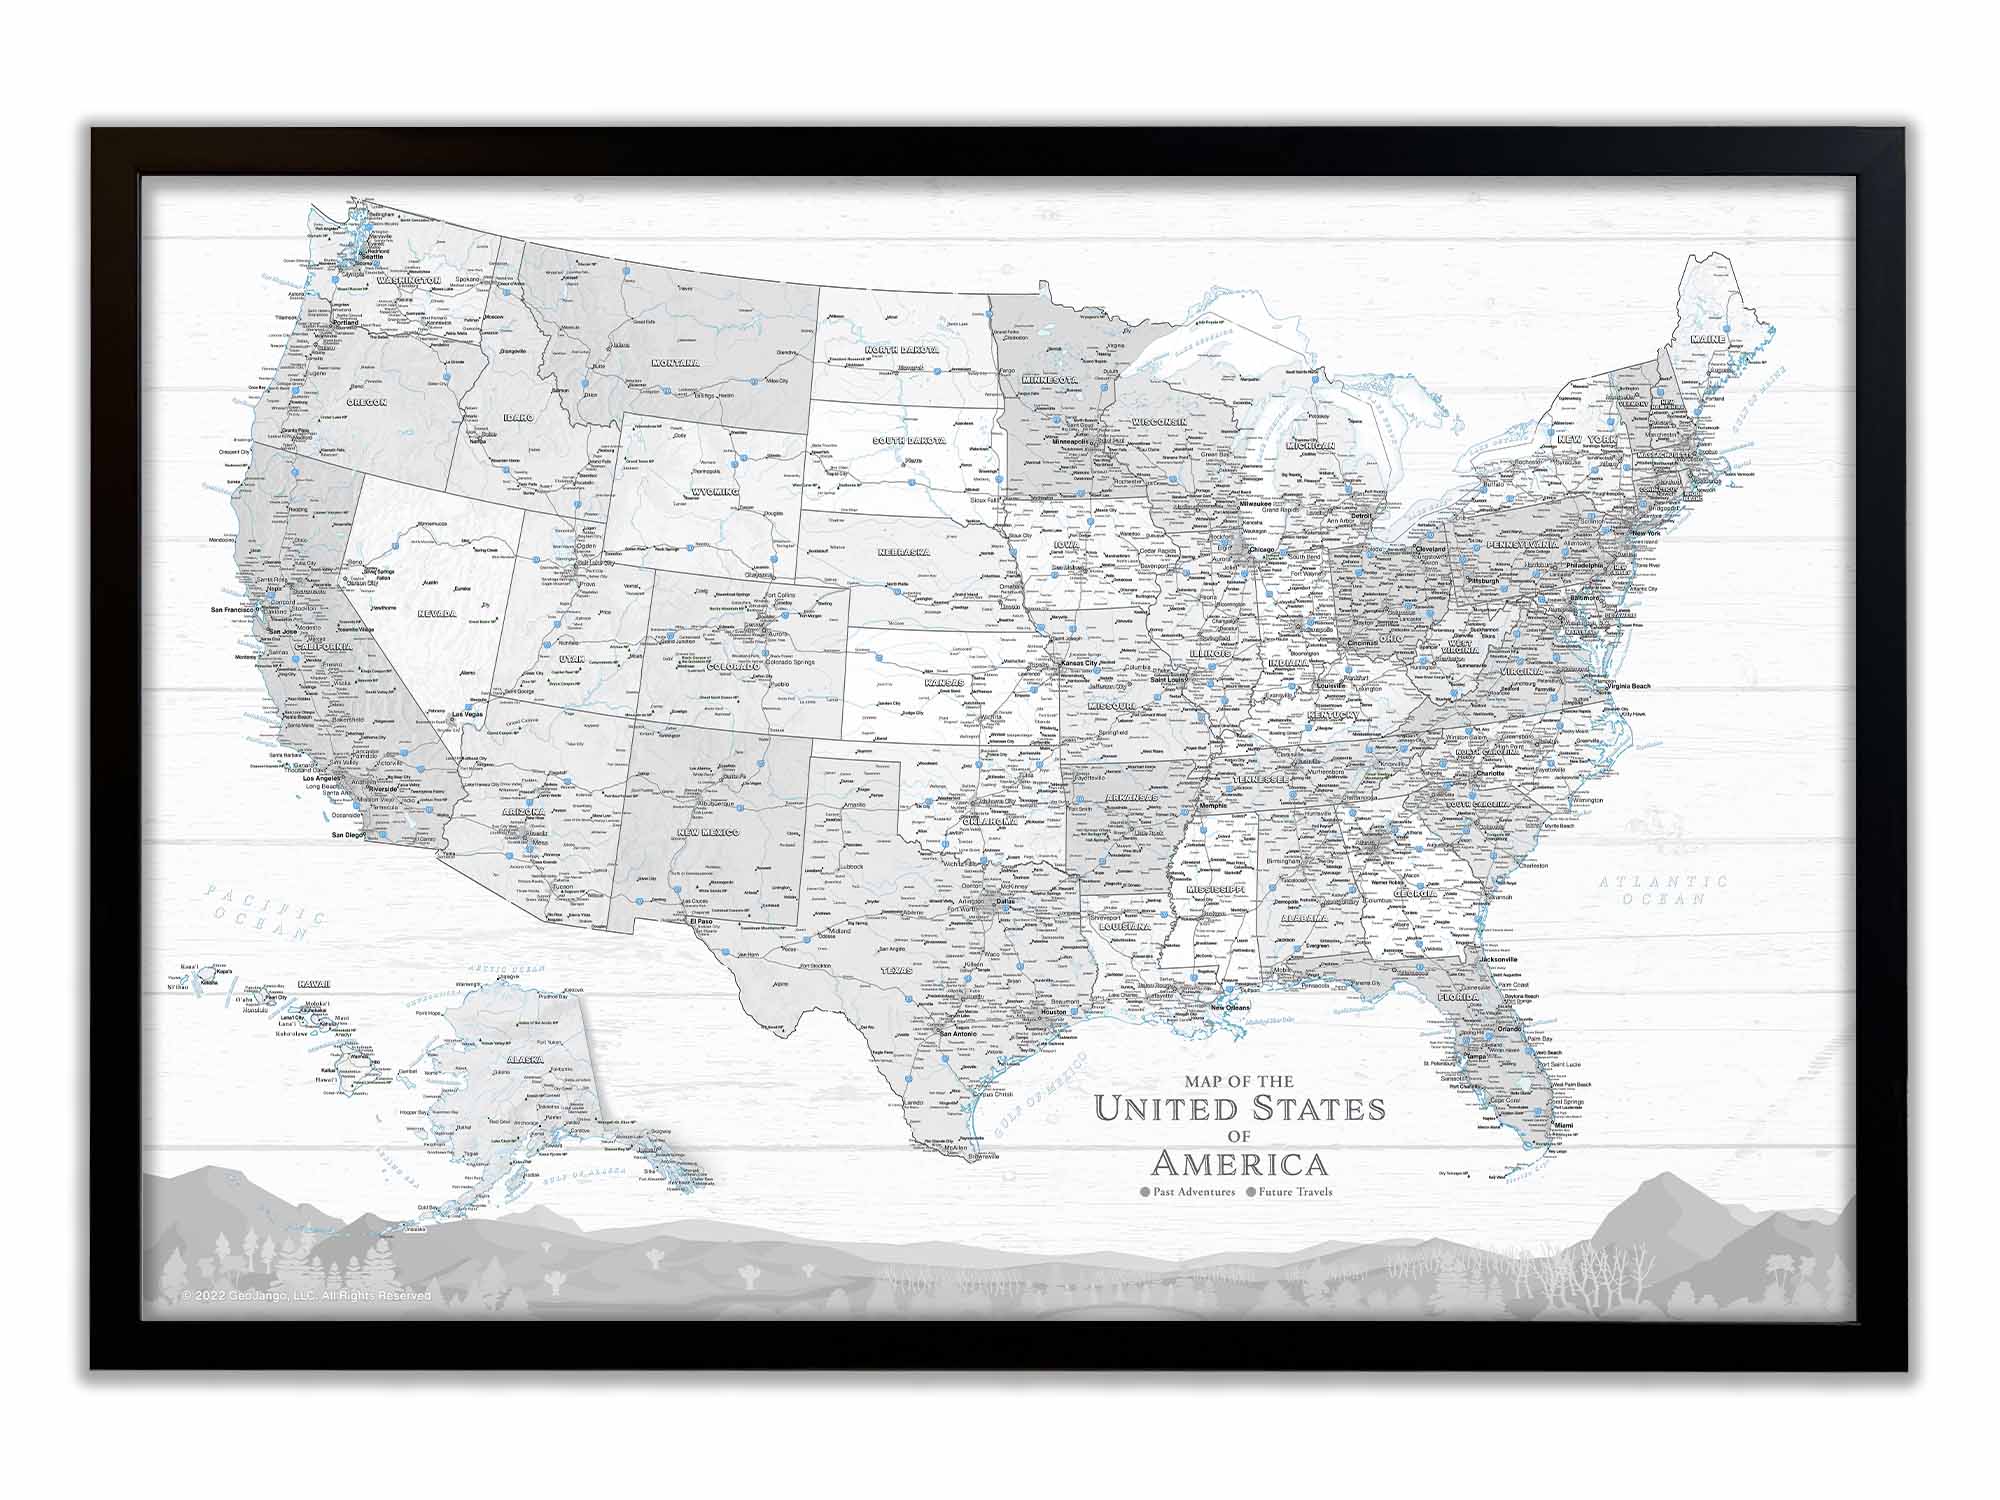 Large USA Map with states and Detailed Cities for traveling - push pin map